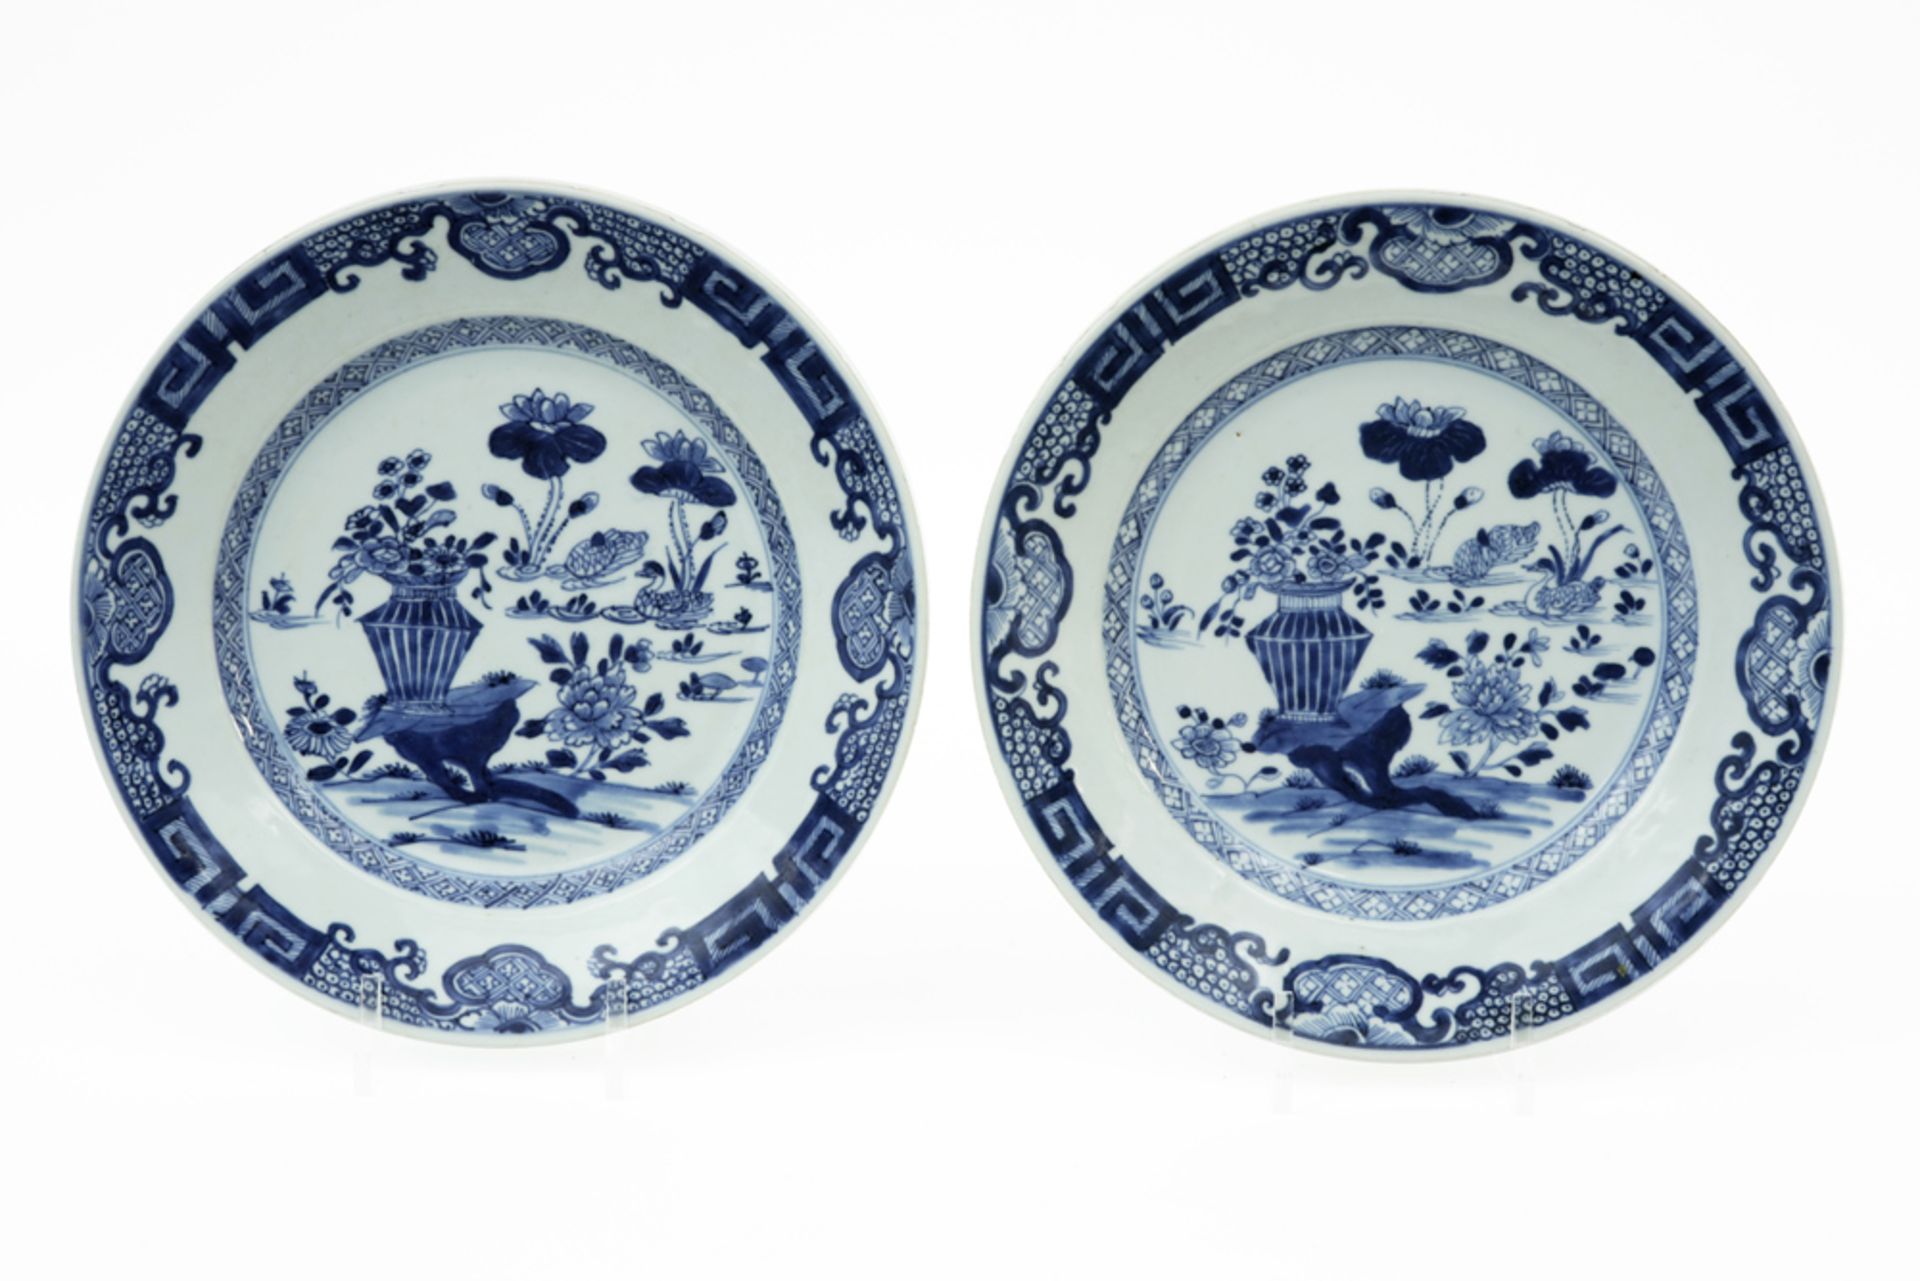 pair of 18th Cent. Chinese plates in porcelain with a blue/white decor with a vase in a garden ||